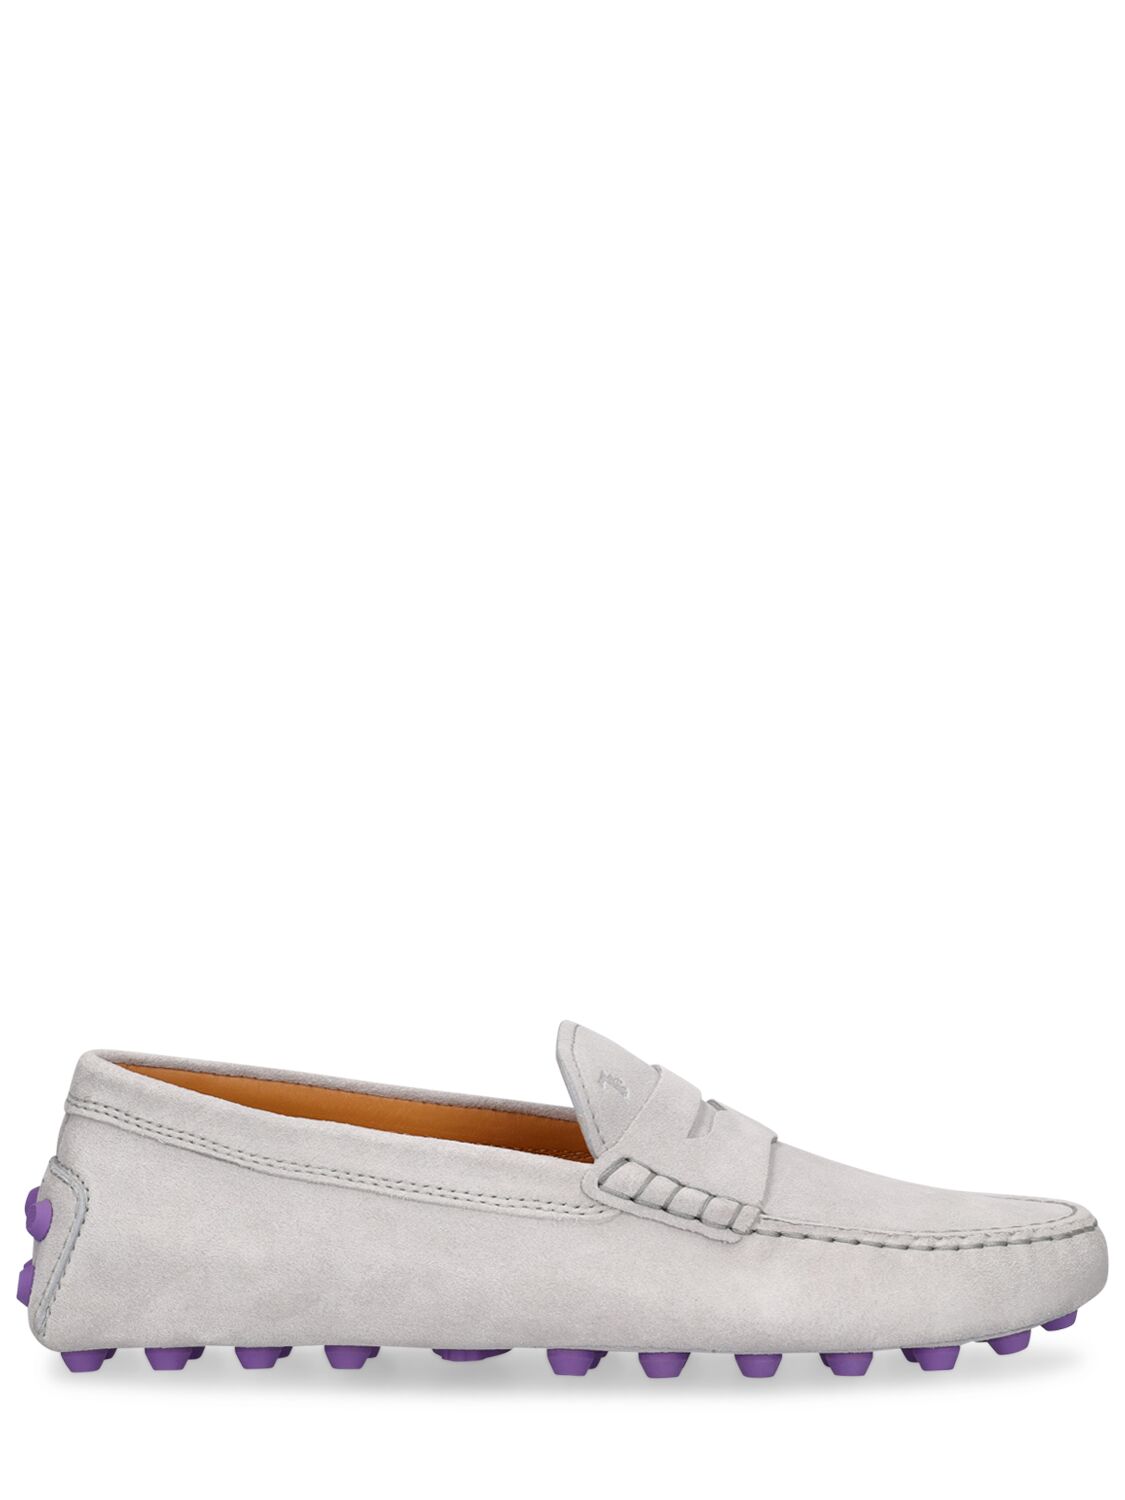 Tod's Gommini Macro Suede Loafers In Light Grey,purp